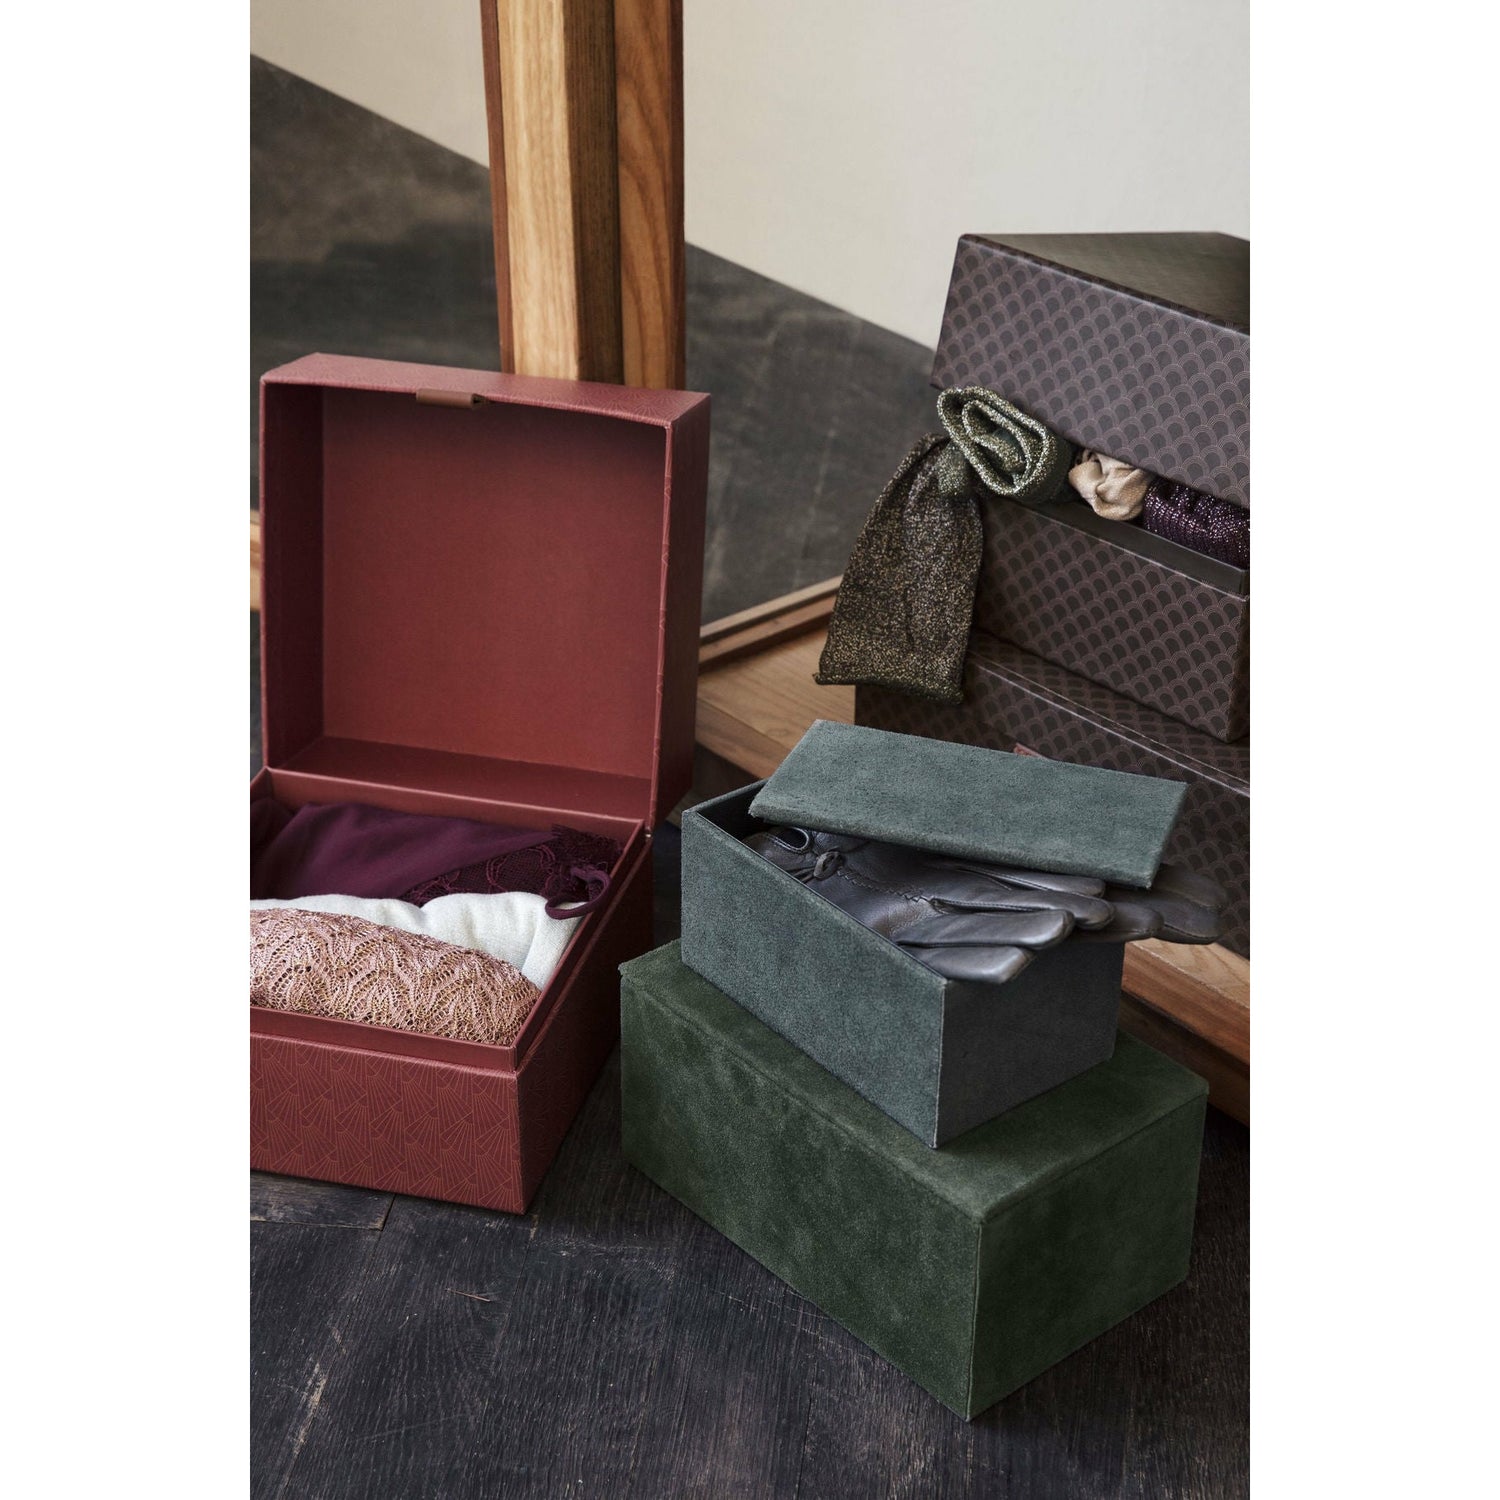 House Doctor - Suede storage boxes with 2 - Henna